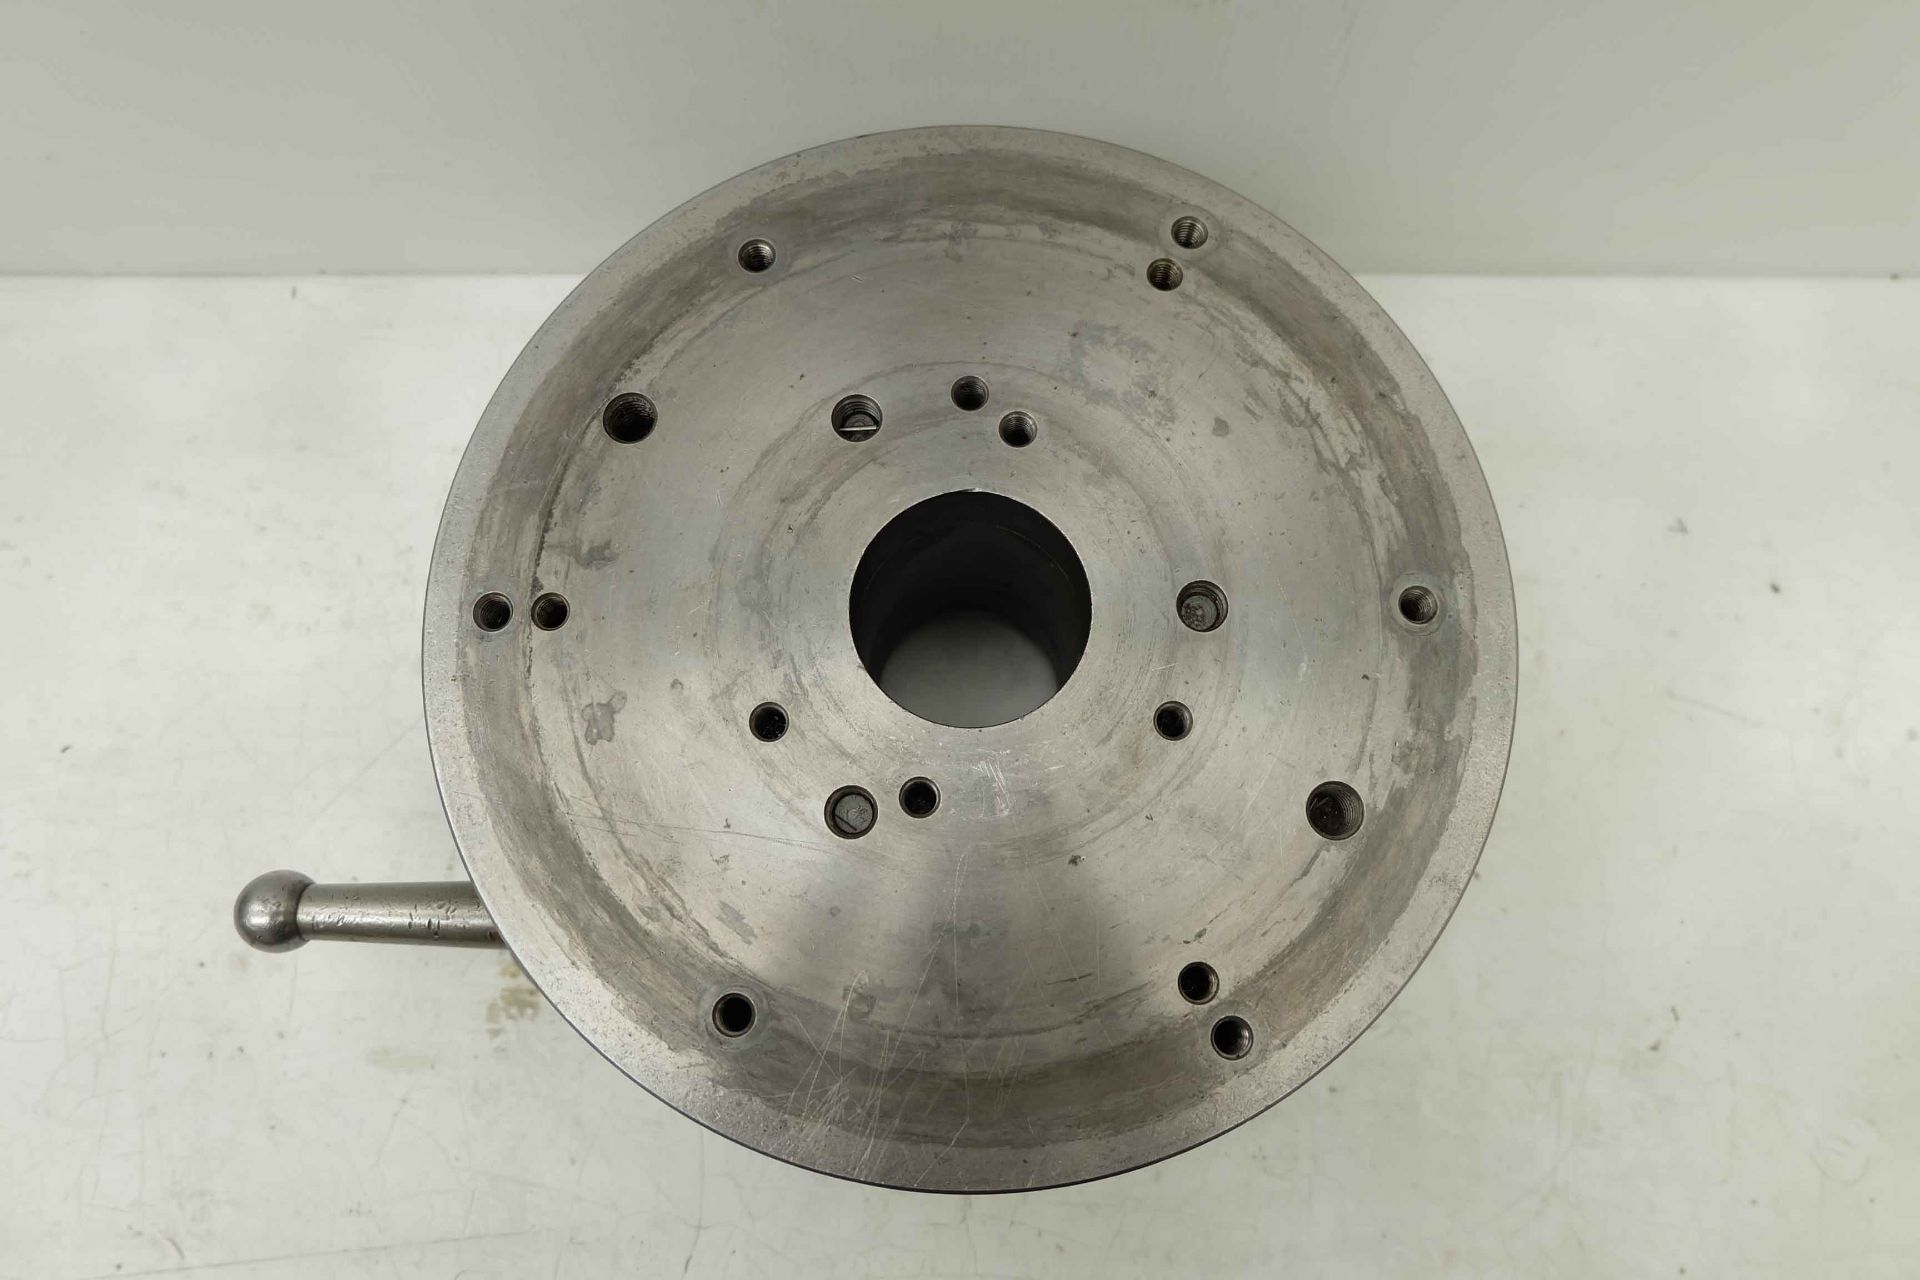 Indexing Fixture 24 Posistion. With 240 mm Diameter Back Plate Fitted To Suit Chucks. - Image 3 of 6